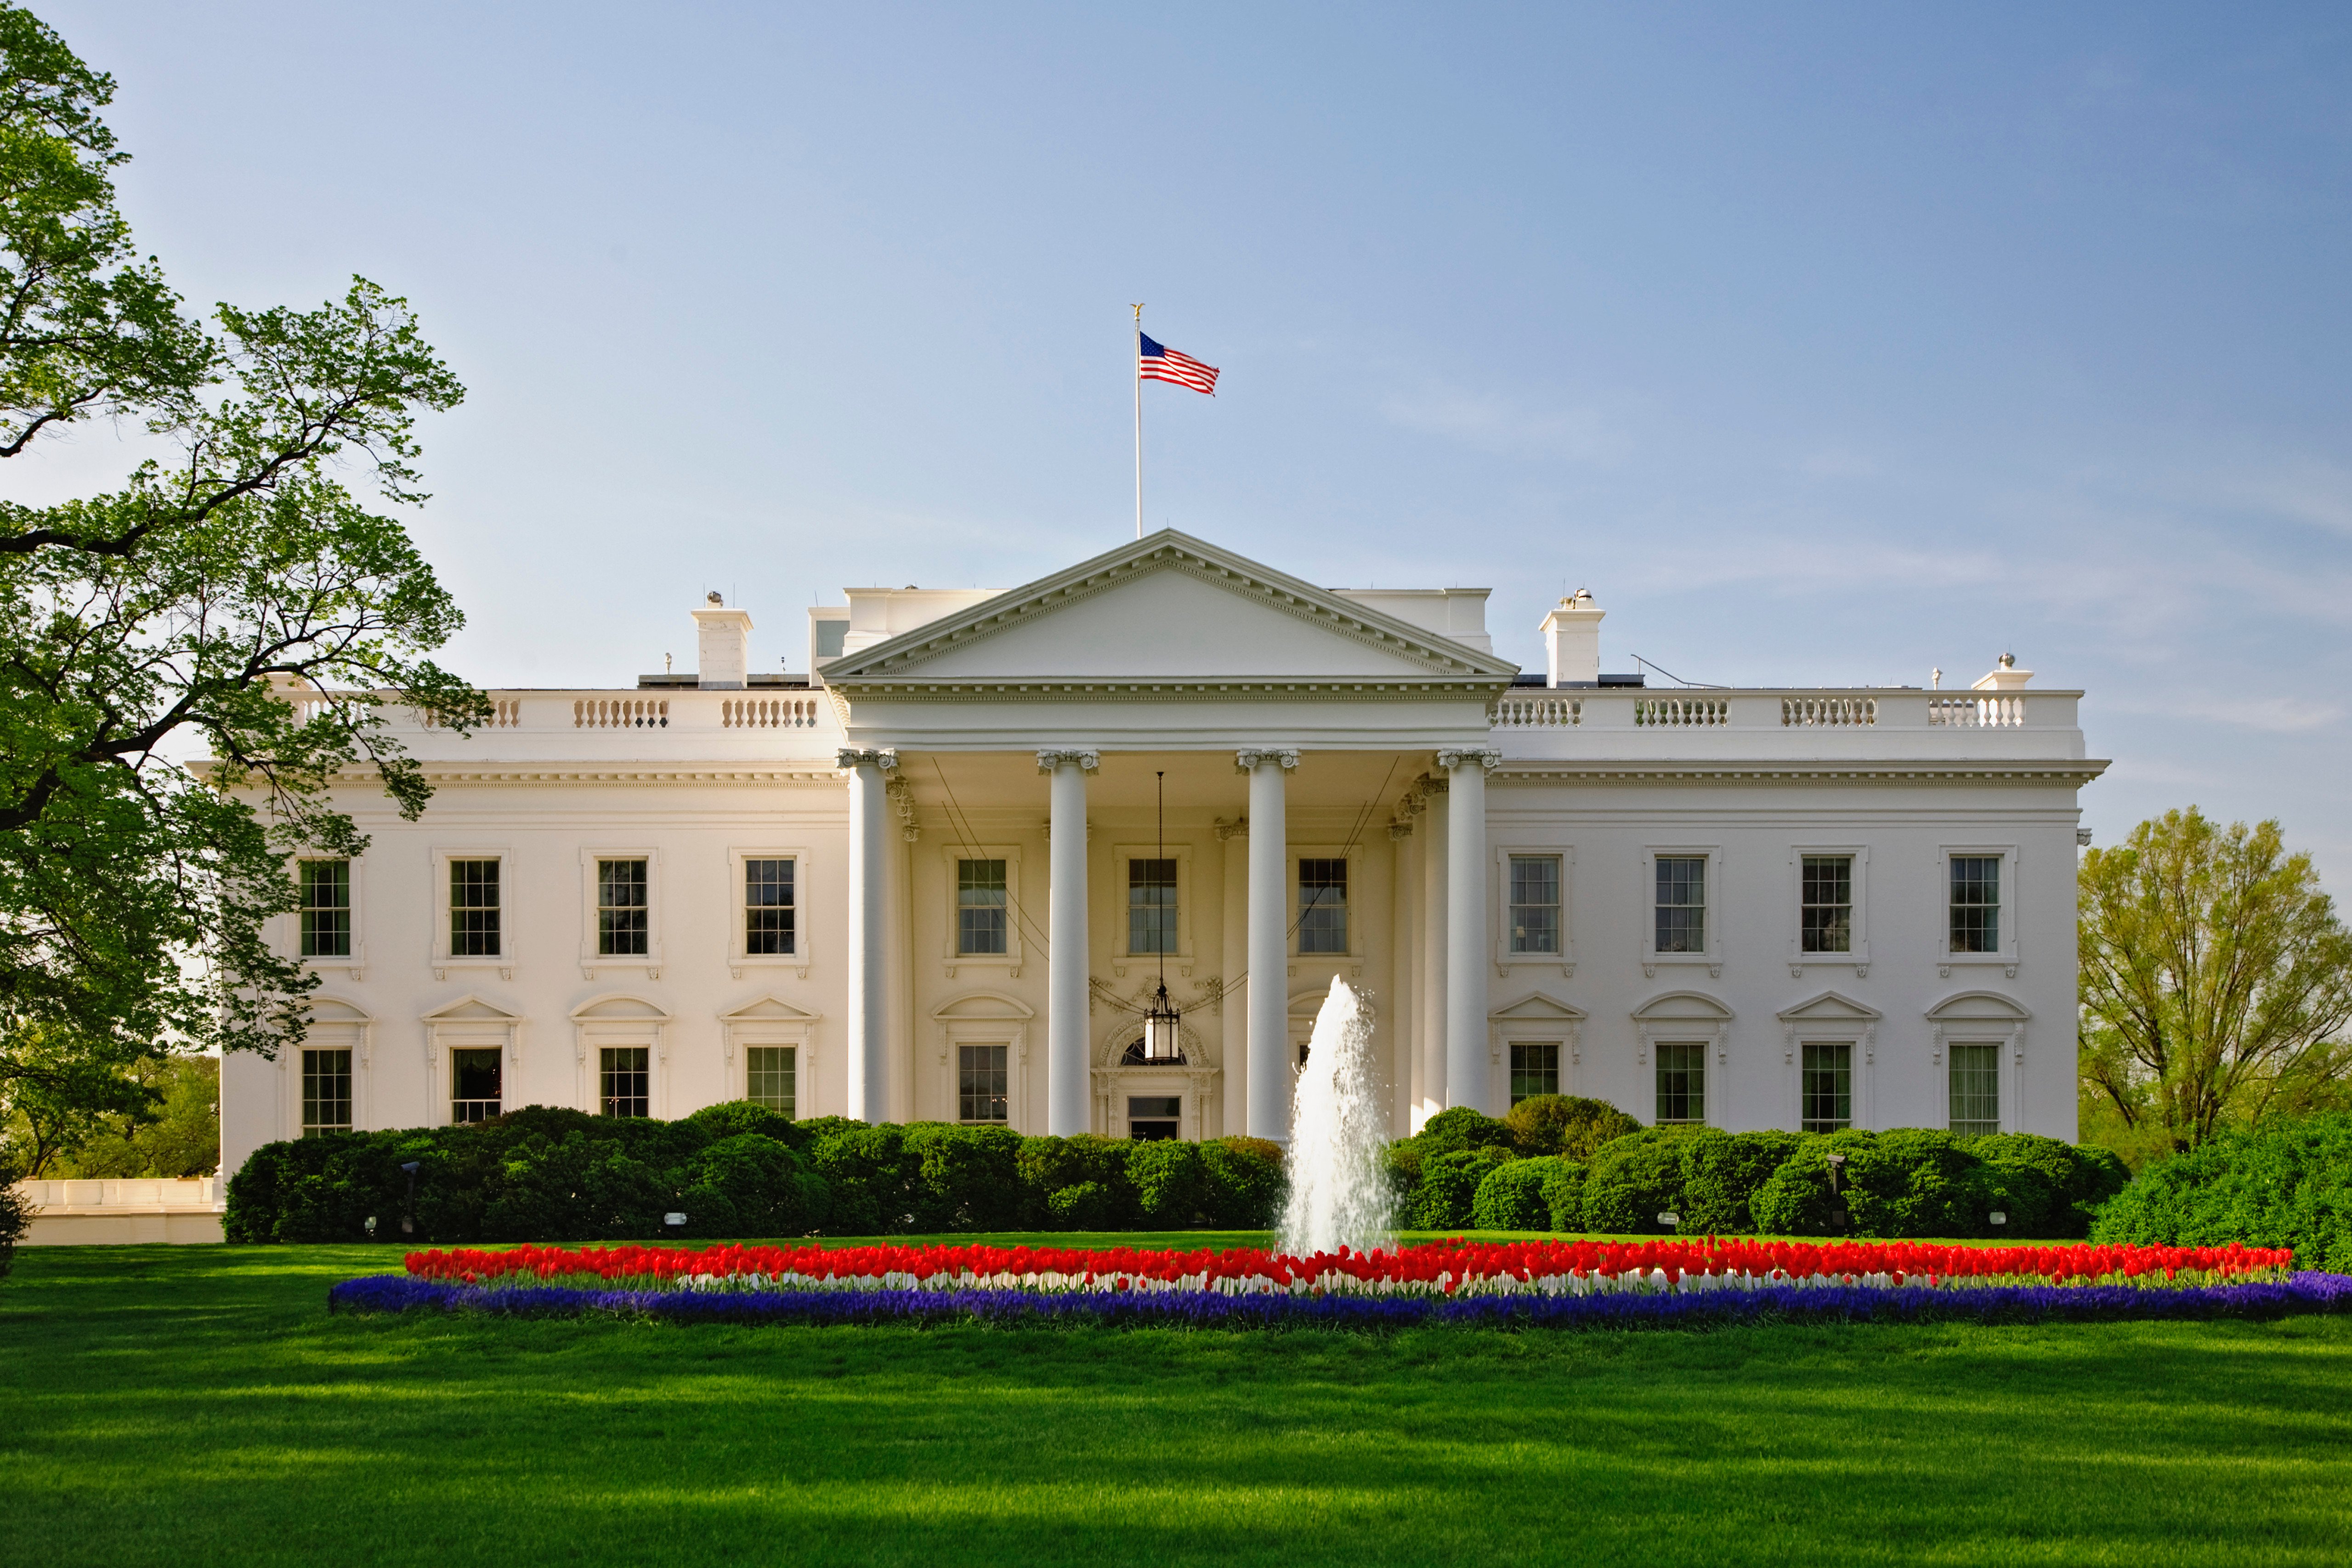 White House: Fintech ‘Changing Relations’ to Finance